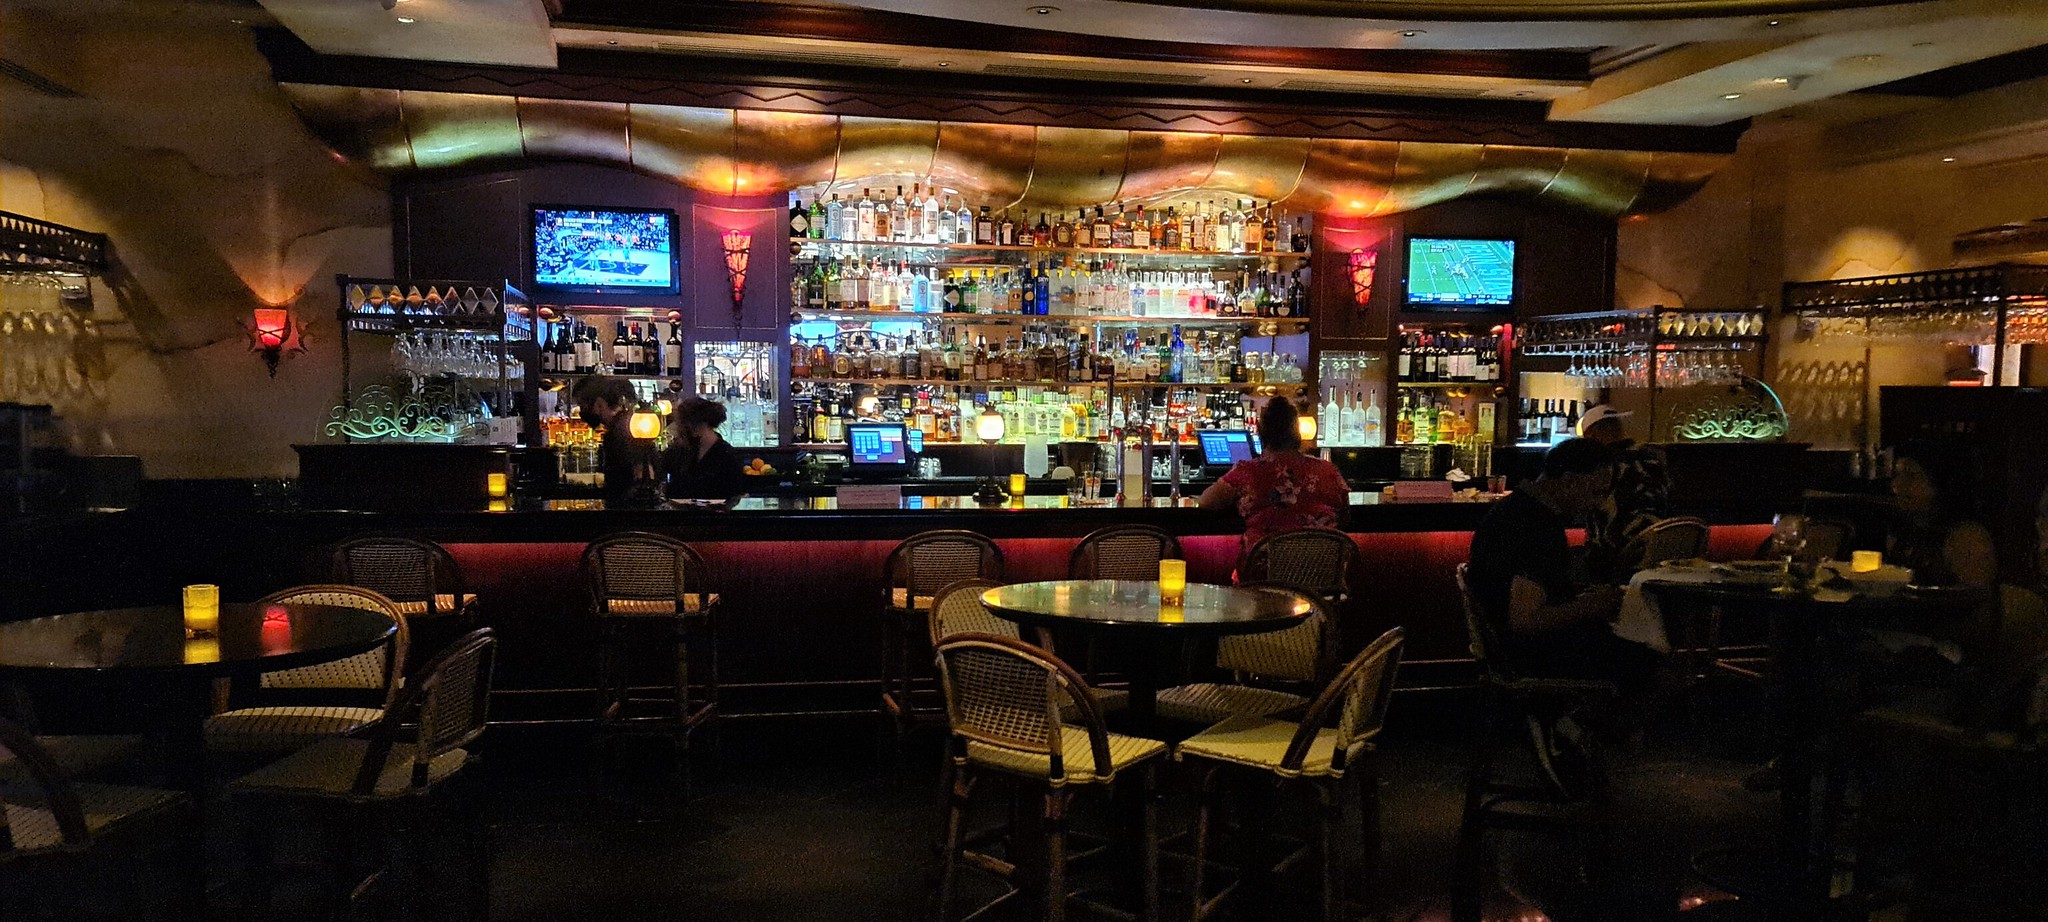 The bar at The Cheesecake Factory in Honolulu